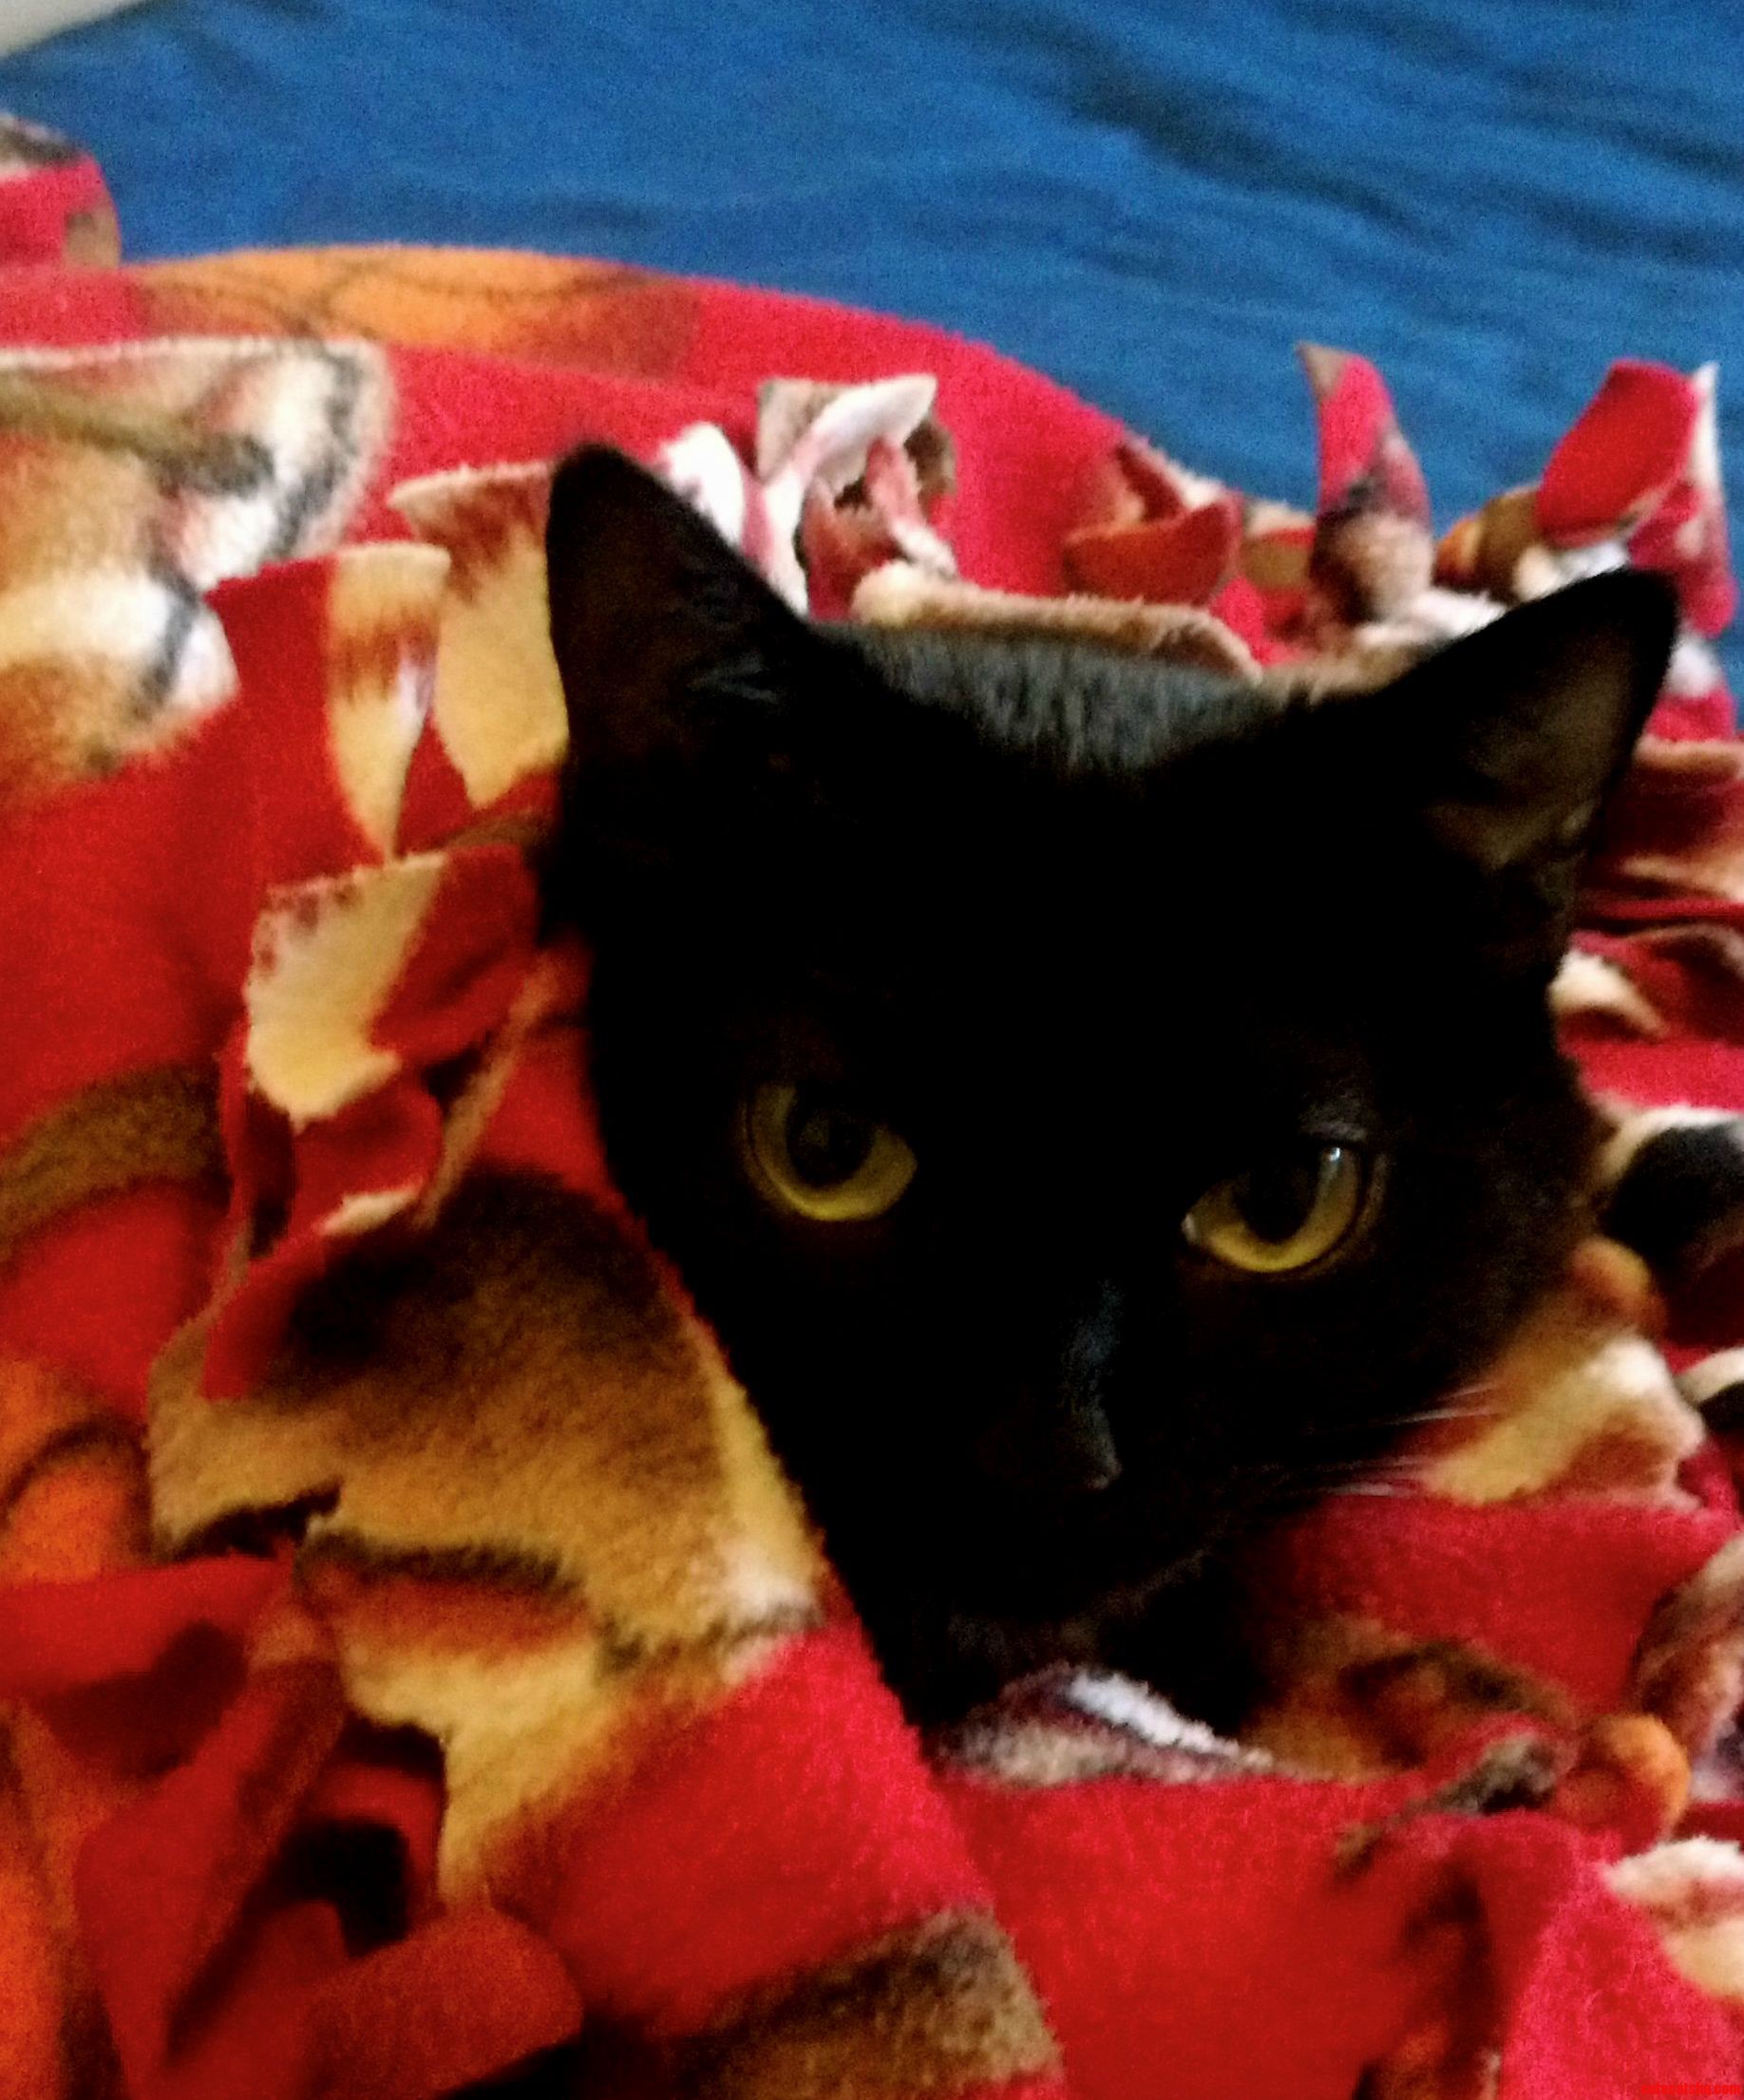 Toothless Wraps Herself In The Blanket And Becomes A Burrito Cat.